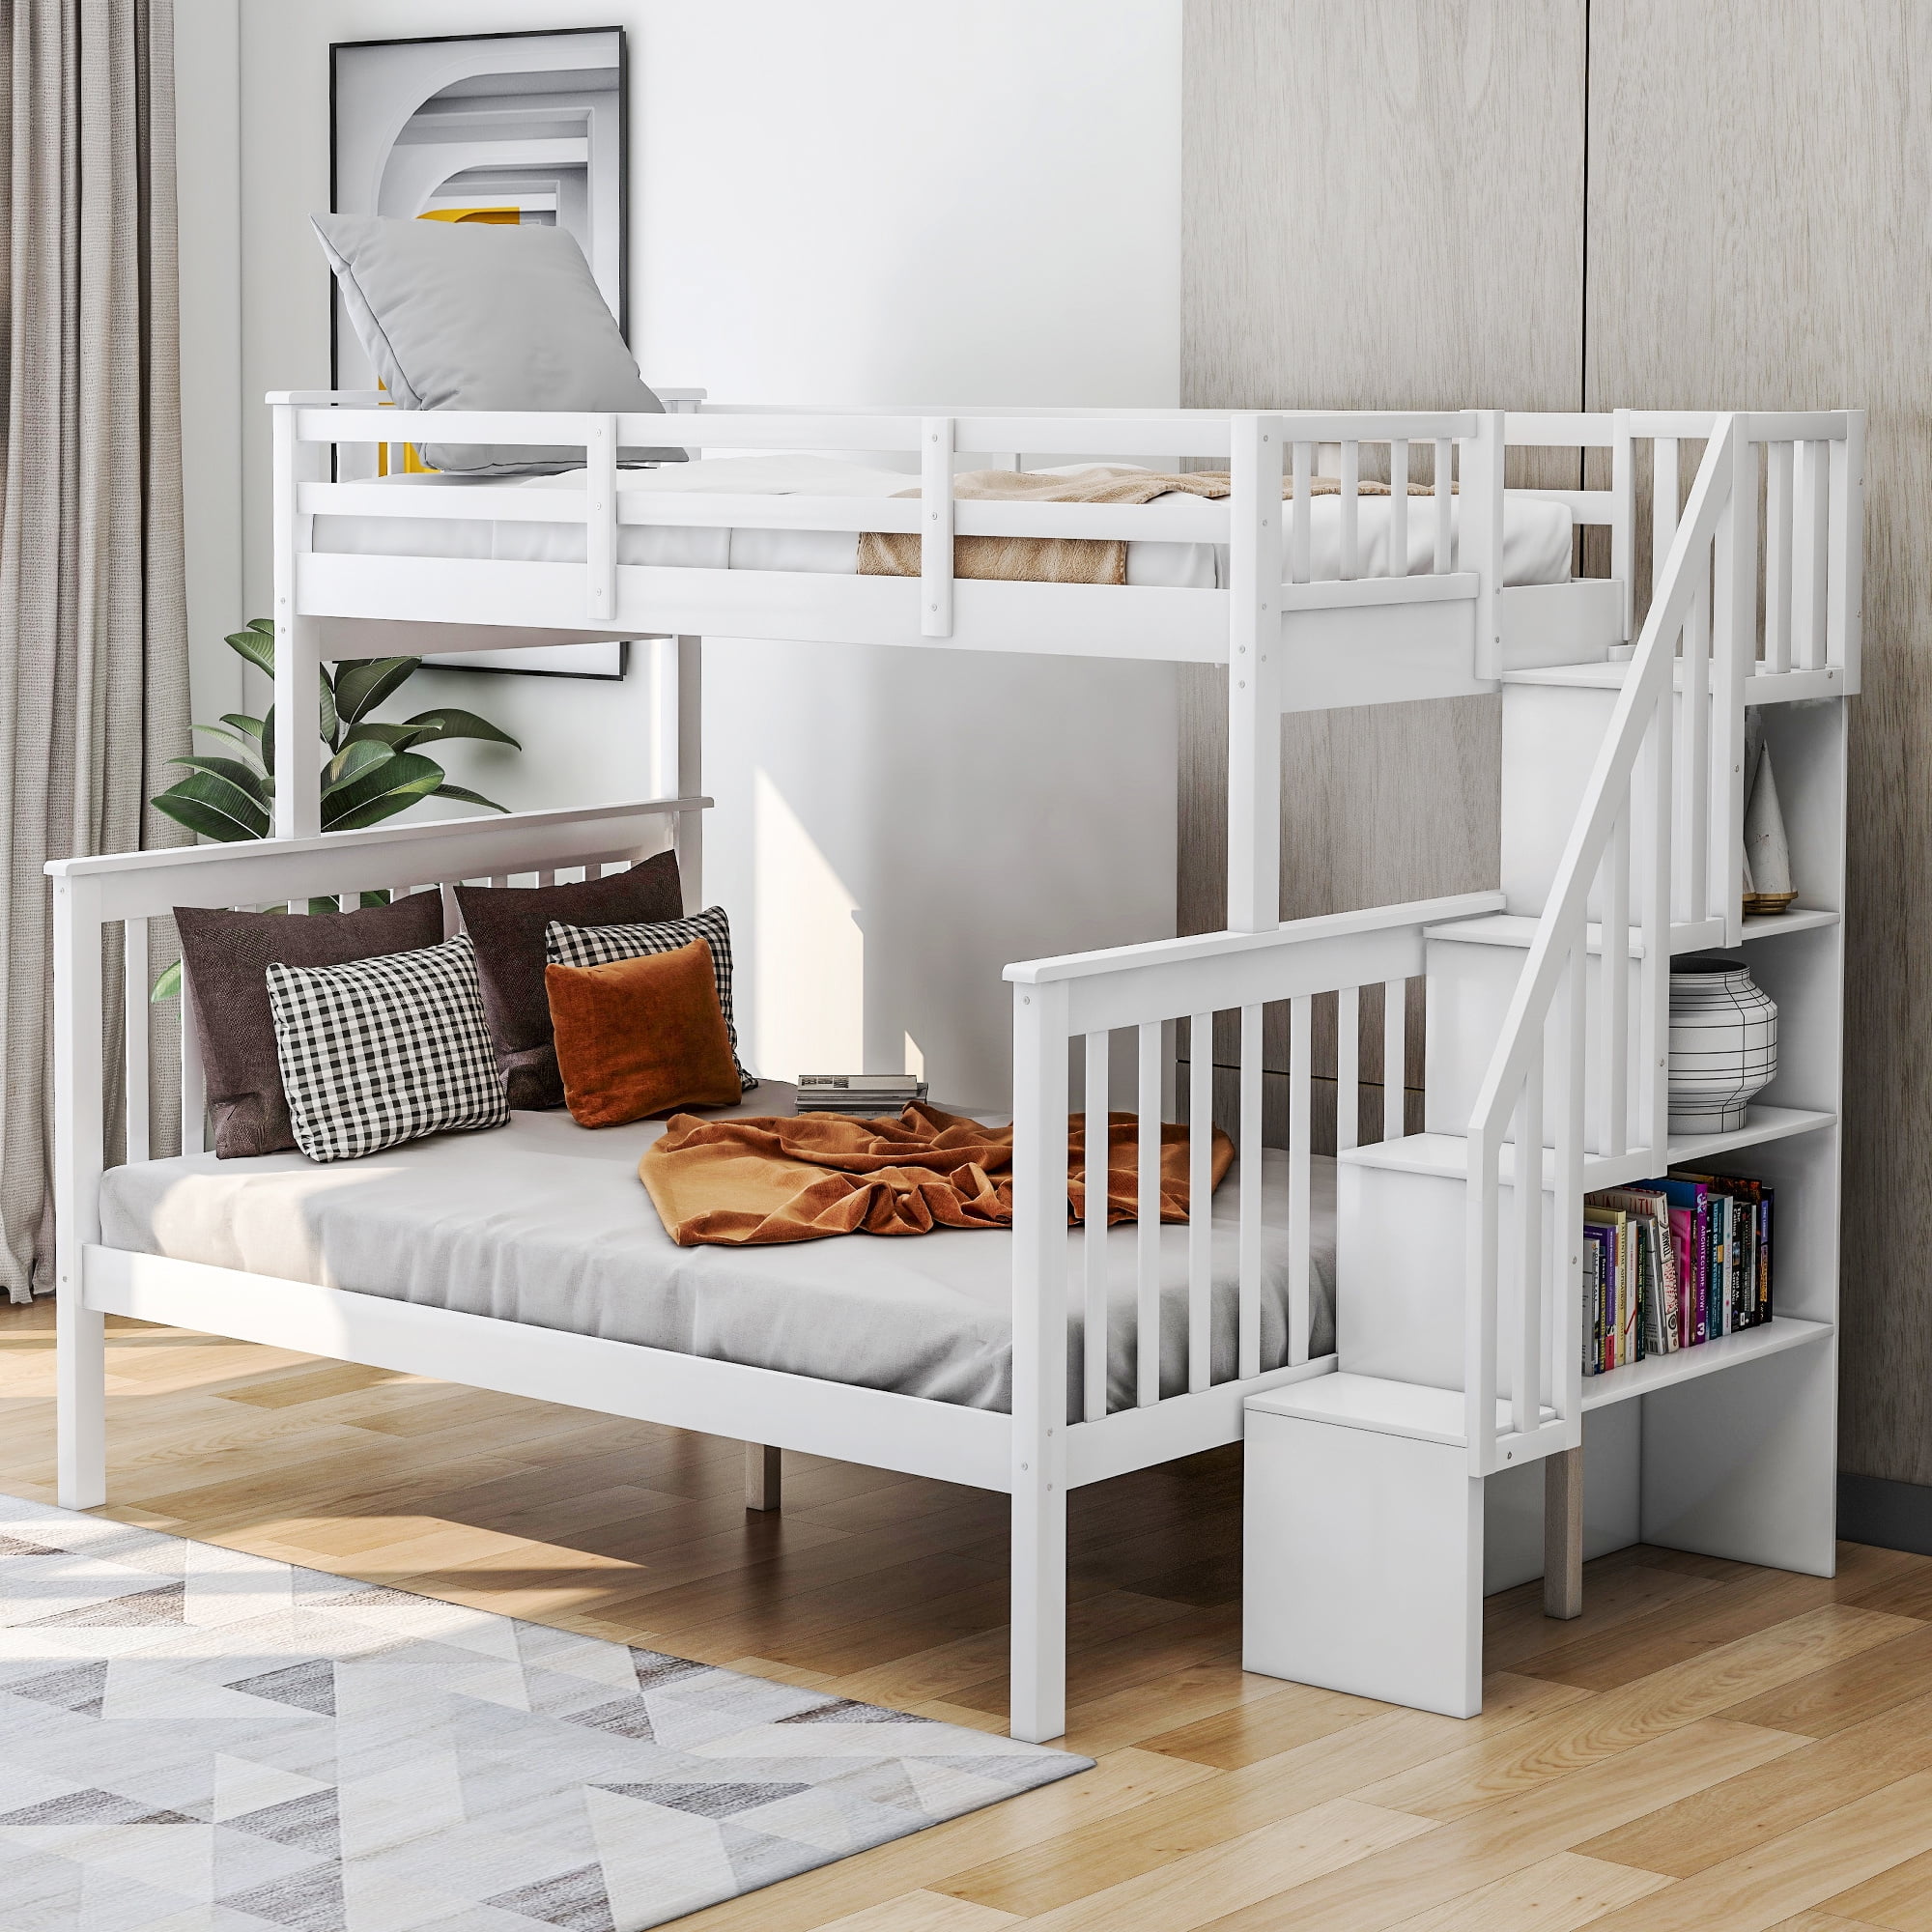 SEPERATES INTO TWO SINGLE BEDS Detachable Bunk Bed FREE DELIVERY WHITE 